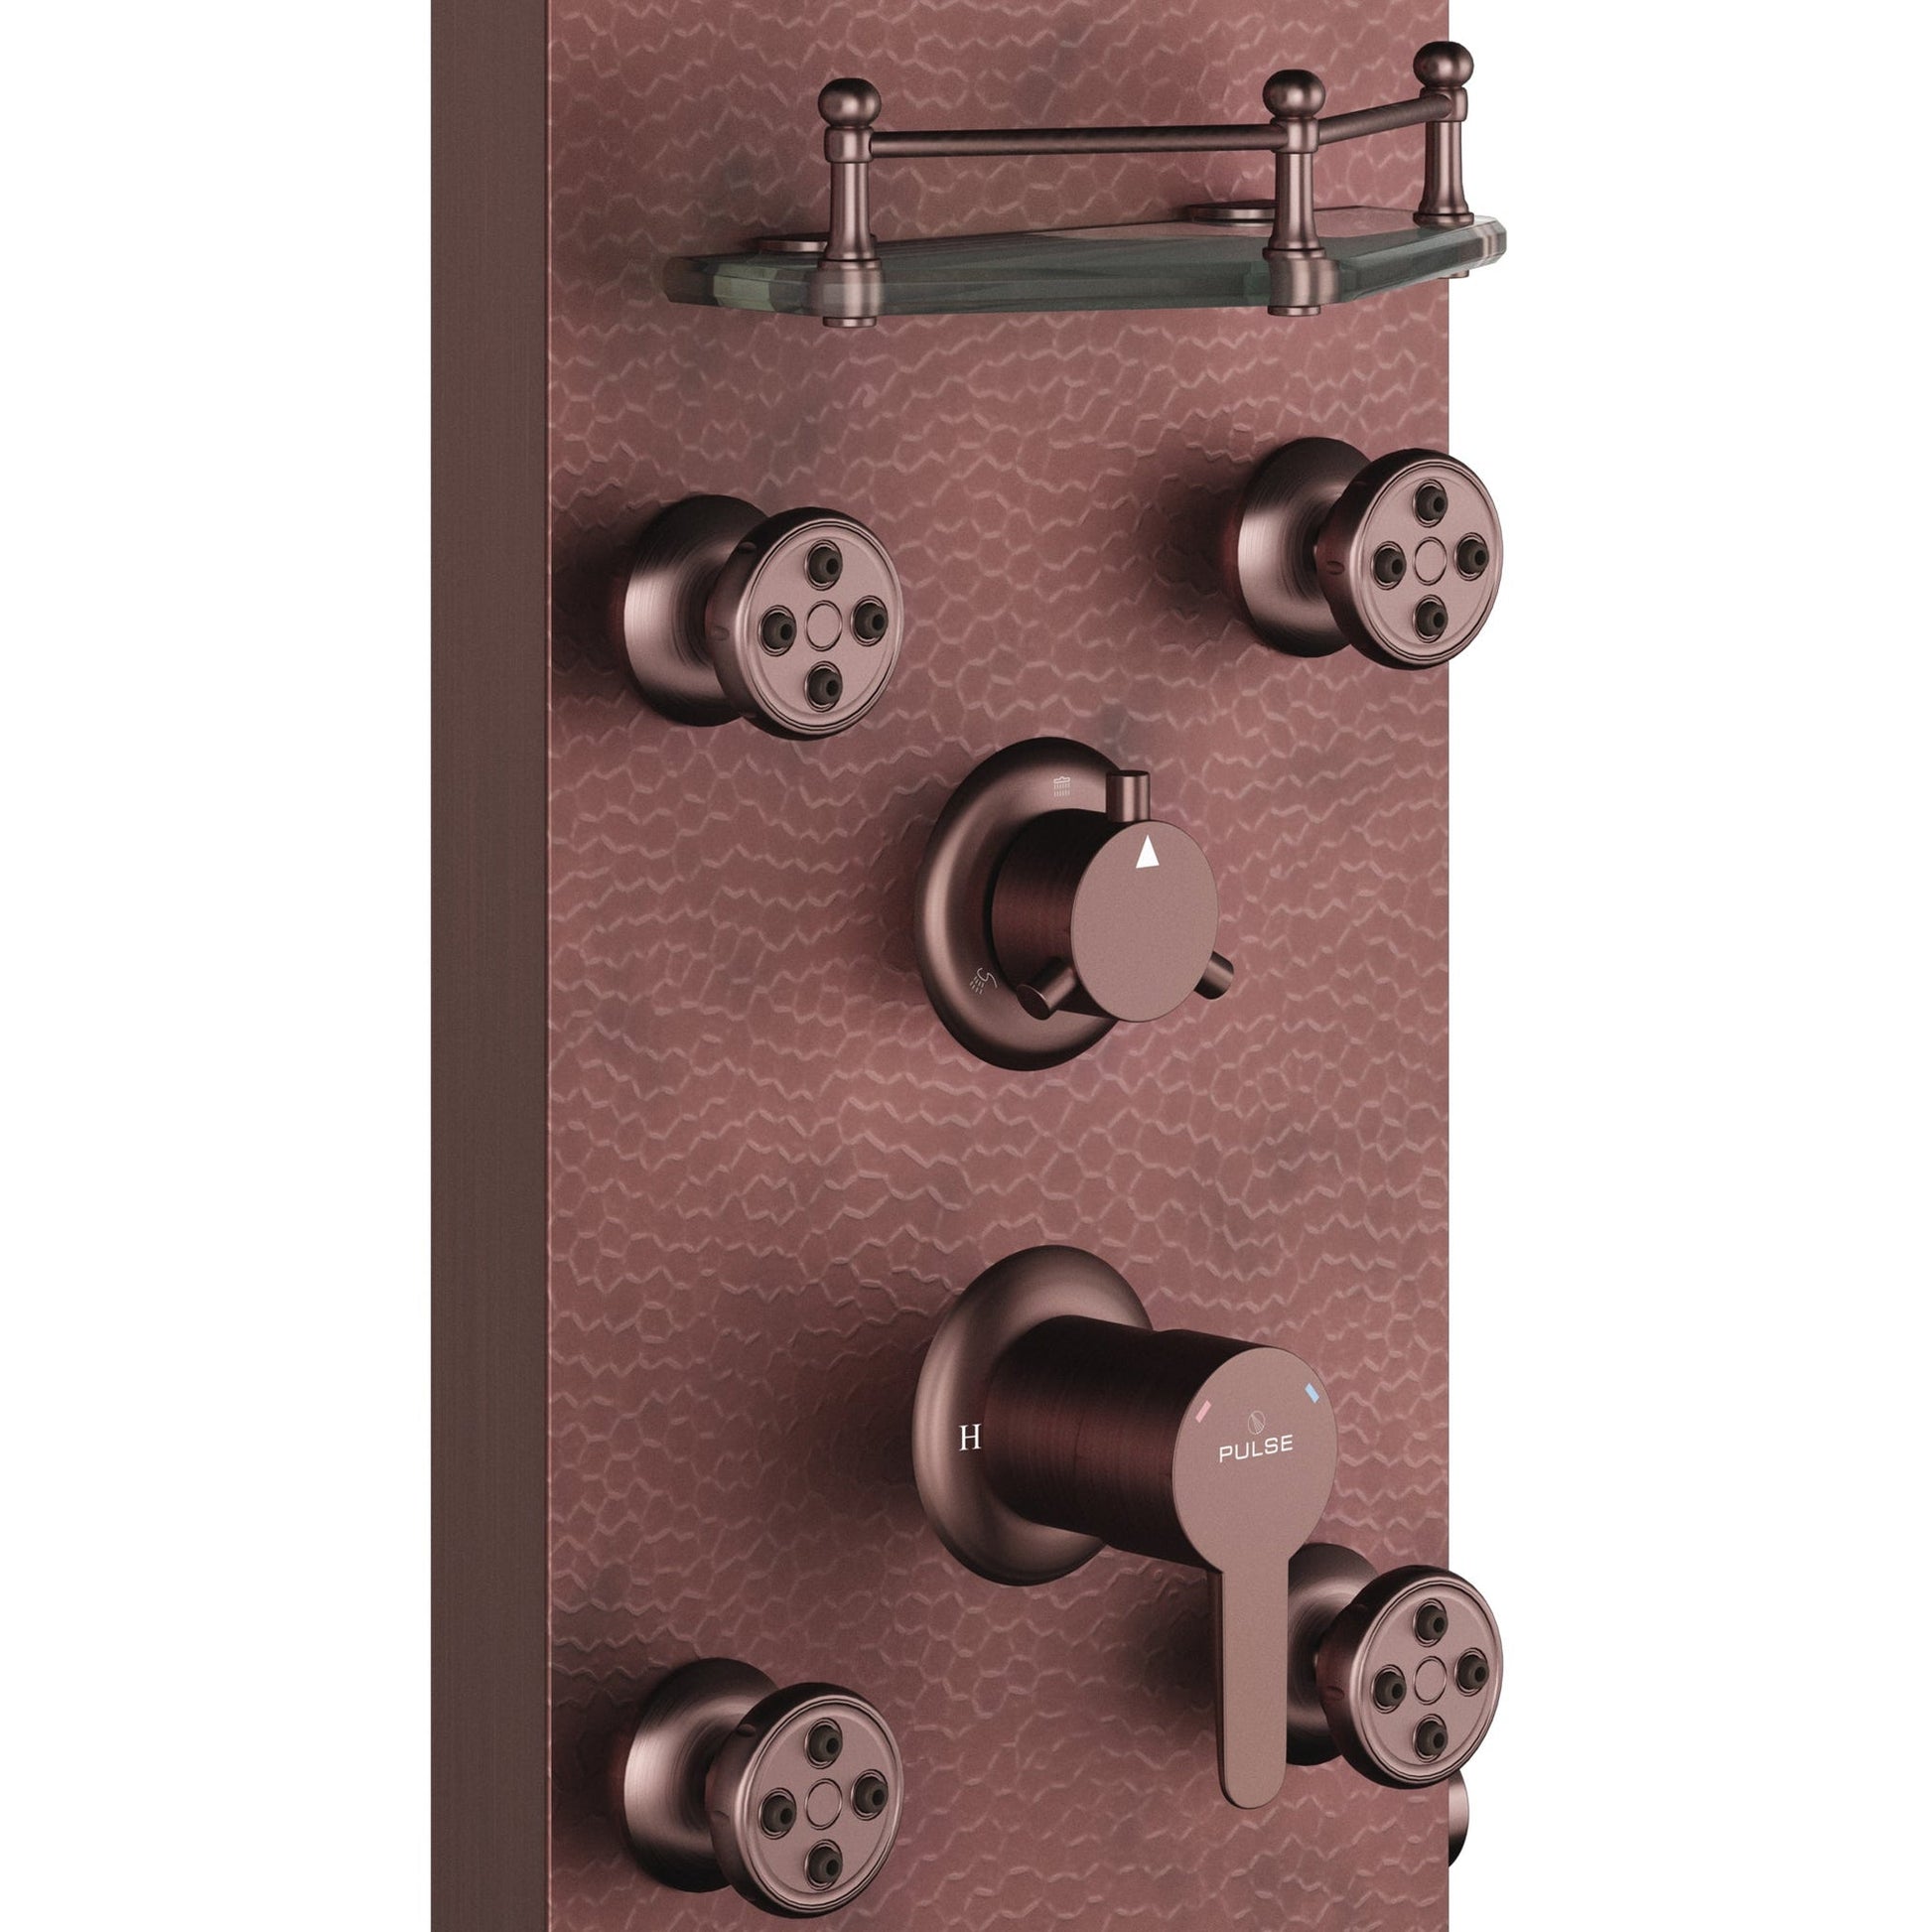 PULSE ShowerSpas Navajo 55" Hammered Copper Rain Shower Panel 2.5 GPM in Oil Rubbed Bronze Finish With 4 Multi Function Body Jets and Hand Shower